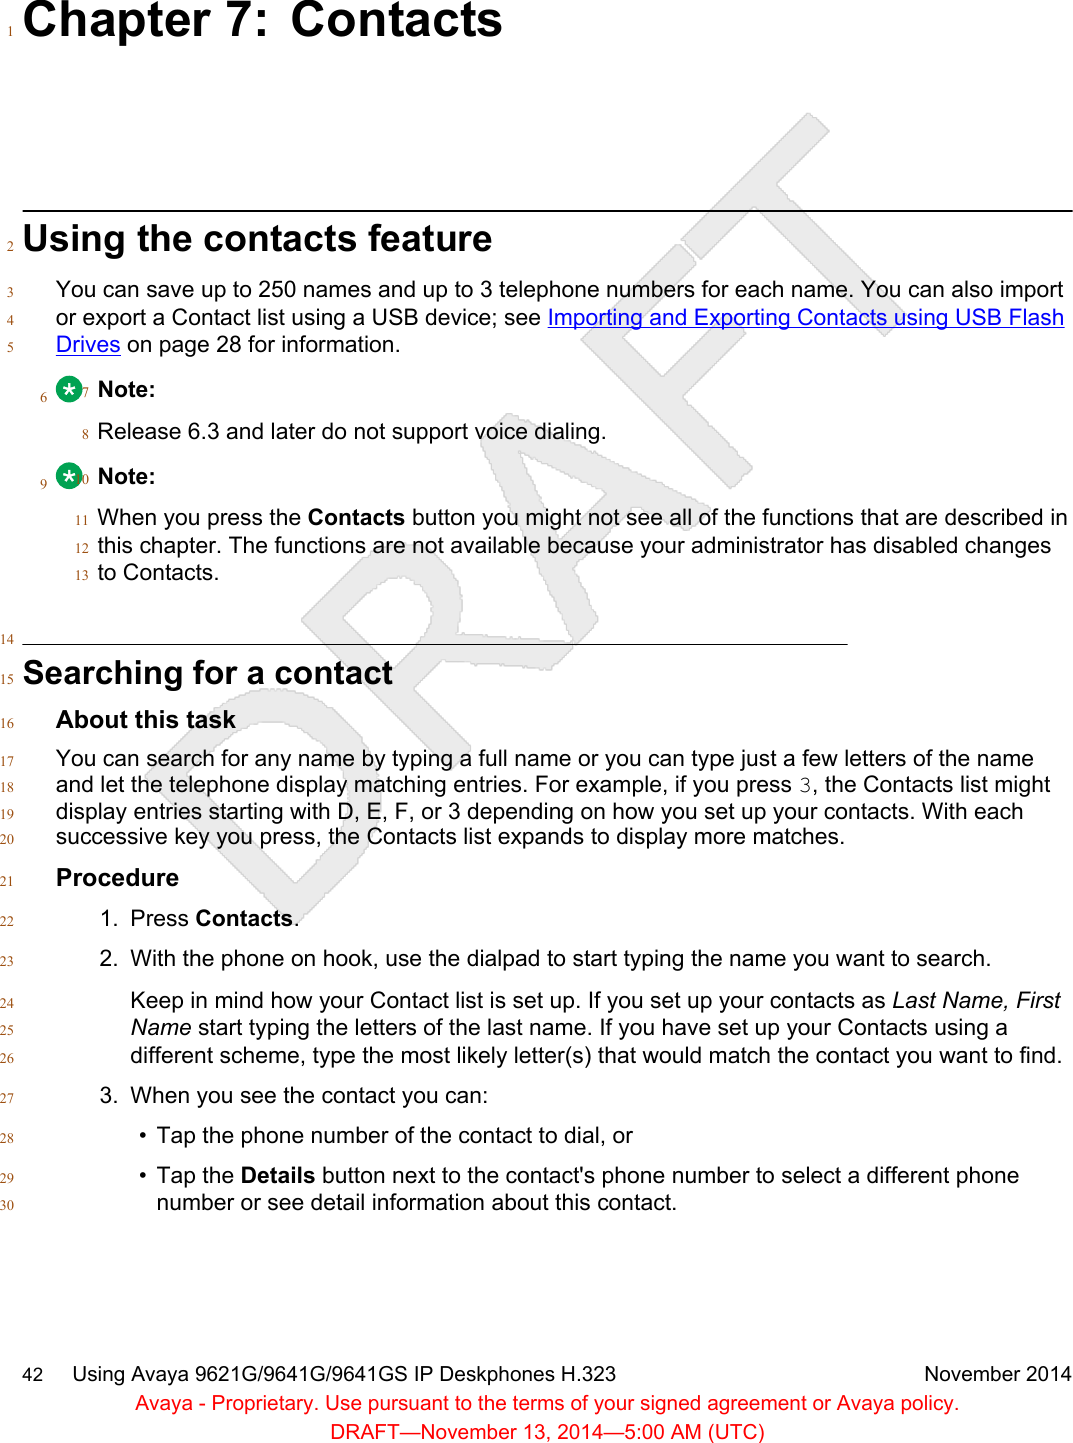 Chapter 7: Contacts1Using the contacts feature2You can save up to 250 names and up to 3 telephone numbers for each name. You can also import3or export a Contact list using a USB device; see Importing and Exporting Contacts using USB Flash4Drives on page 28 for information.56Note:7Release 6.3 and later do not support voice dialing.89Note:10When you press the Contacts button you might not see all of the functions that are described in11this chapter. The functions are not available because your administrator has disabled changes12to Contacts.1314Searching for a contact15About this task16You can search for any name by typing a full name or you can type just a few letters of the name17and let the telephone display matching entries. For example, if you press 3, the Contacts list might18display entries starting with D, E, F, or 3 depending on how you set up your contacts. With each19successive key you press, the Contacts list expands to display more matches.20Procedure211. Press Contacts.222. With the phone on hook, use the dialpad to start typing the name you want to search.23Keep in mind how your Contact list is set up. If you set up your contacts as Last Name, First24Name start typing the letters of the last name. If you have set up your Contacts using a25different scheme, type the most likely letter(s) that would match the contact you want to find.263. When you see the contact you can:27• Tap the phone number of the contact to dial, or28• Tap the Details button next to the contact&apos;s phone number to select a different phone29number or see detail information about this contact.3042     Using Avaya 9621G/9641G/9641GS IP Deskphones H.323 November 2014Avaya - Proprietary. Use pursuant to the terms of your signed agreement or Avaya policy.DRAFT—November 13, 2014—5:00 AM (UTC)